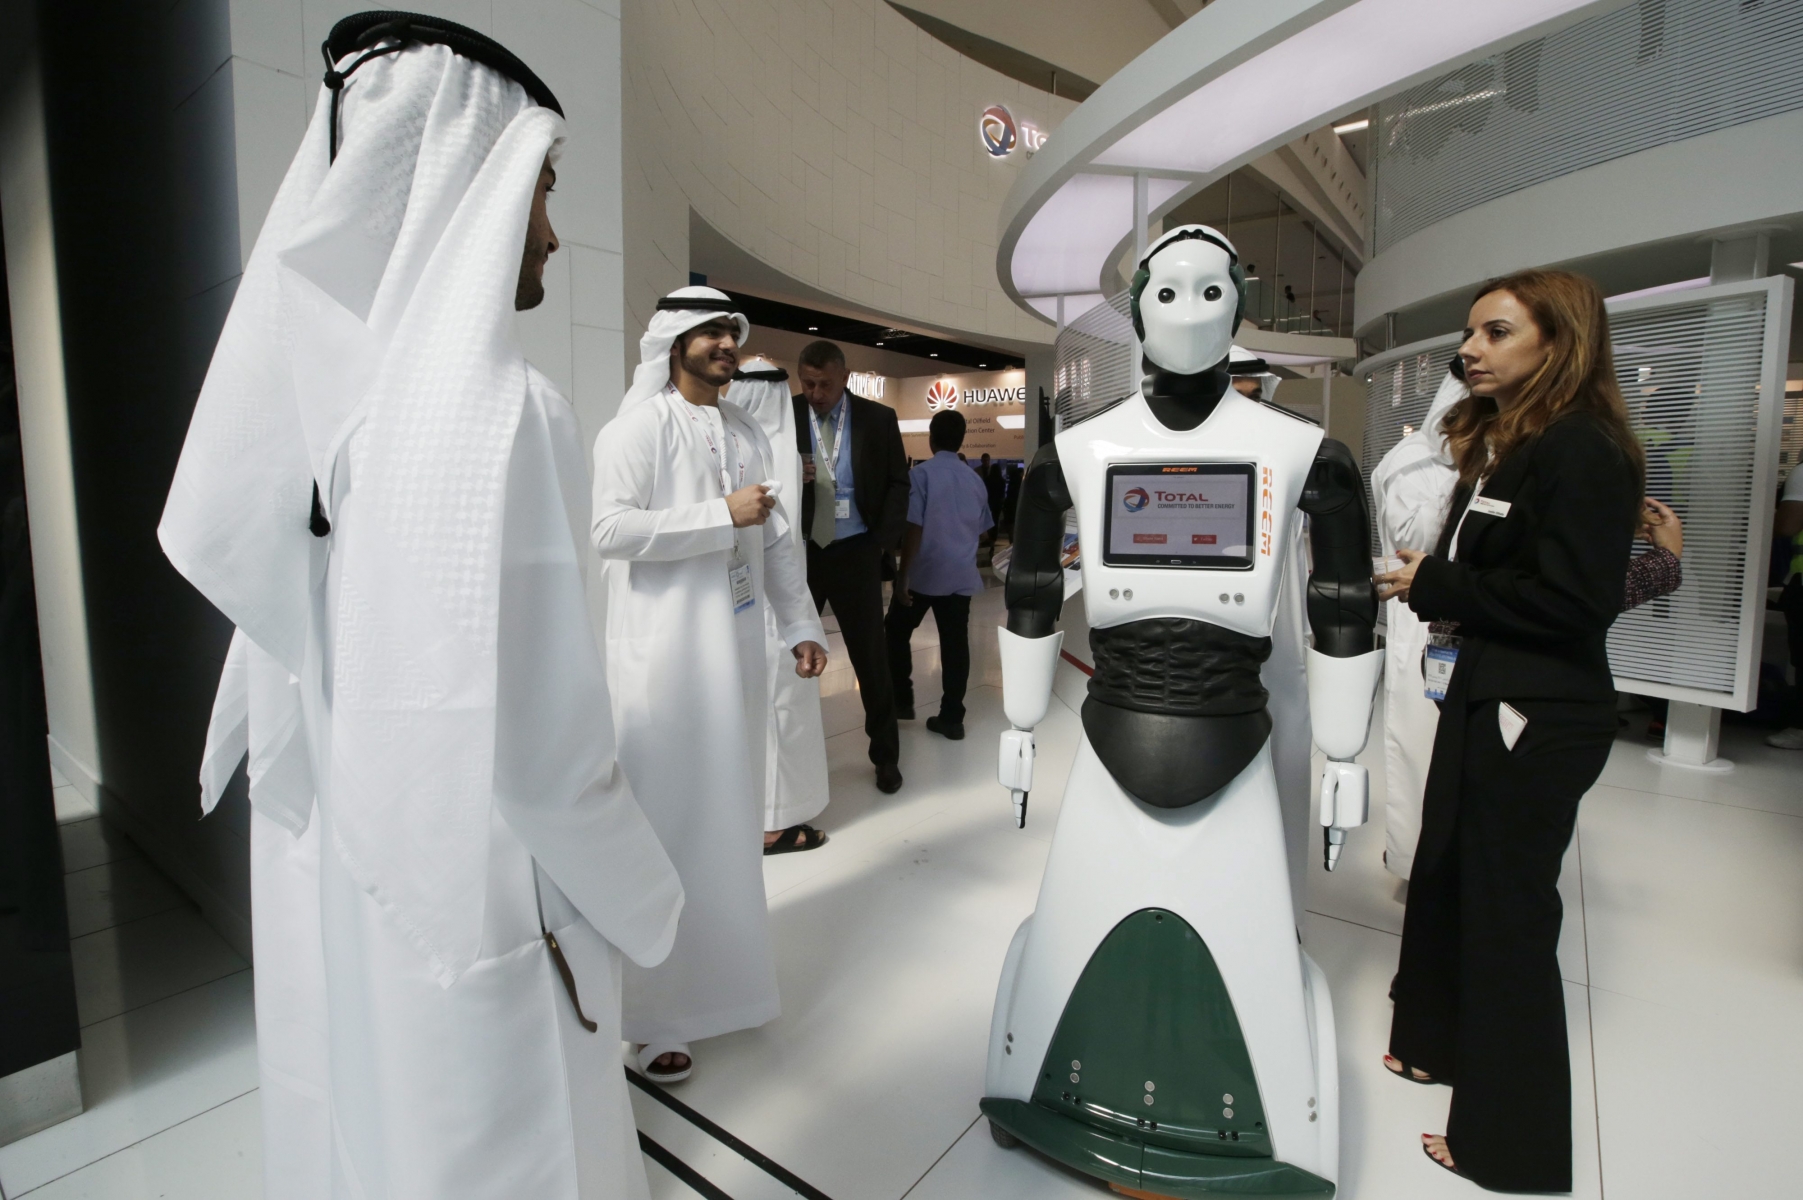 epa05017923 An exhibitor (R) speaks about a robot at Total section at the exhibition of Abu Dhabi International Petroleum Exhibition and Conference (ADIPEC) in Abu Dhabi, United Arab Emirates, 09 November 2015.  ADIPEC, a meeting place of the international oil and gas community, runs between 09 and 12 November 2015.  EPA/ALI HAIDER